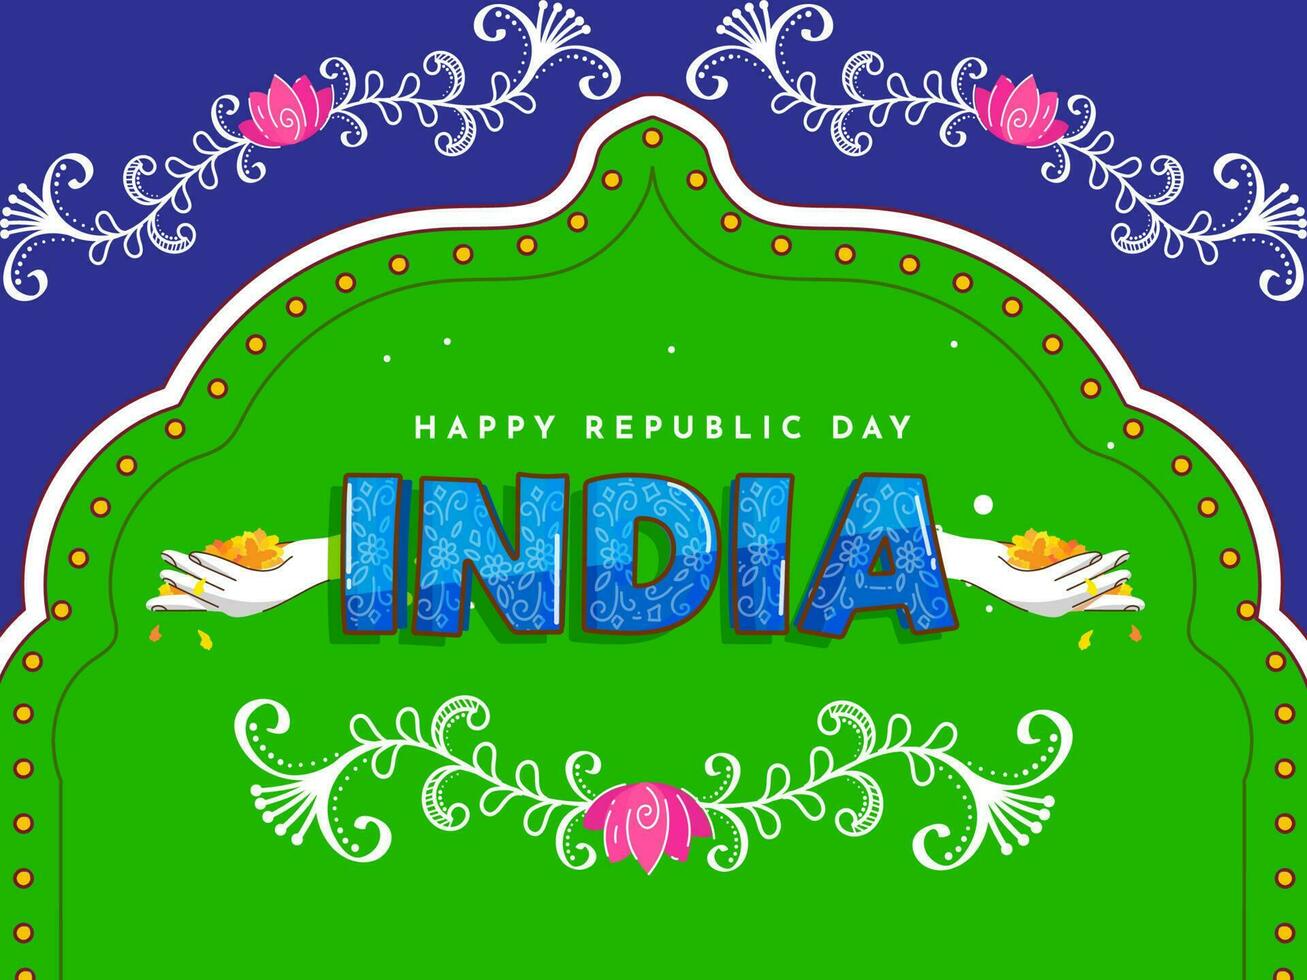 India Happy Republic Day Font With Flowers Falling From Hands And Floral Decorated On Blue And Green Background. vector